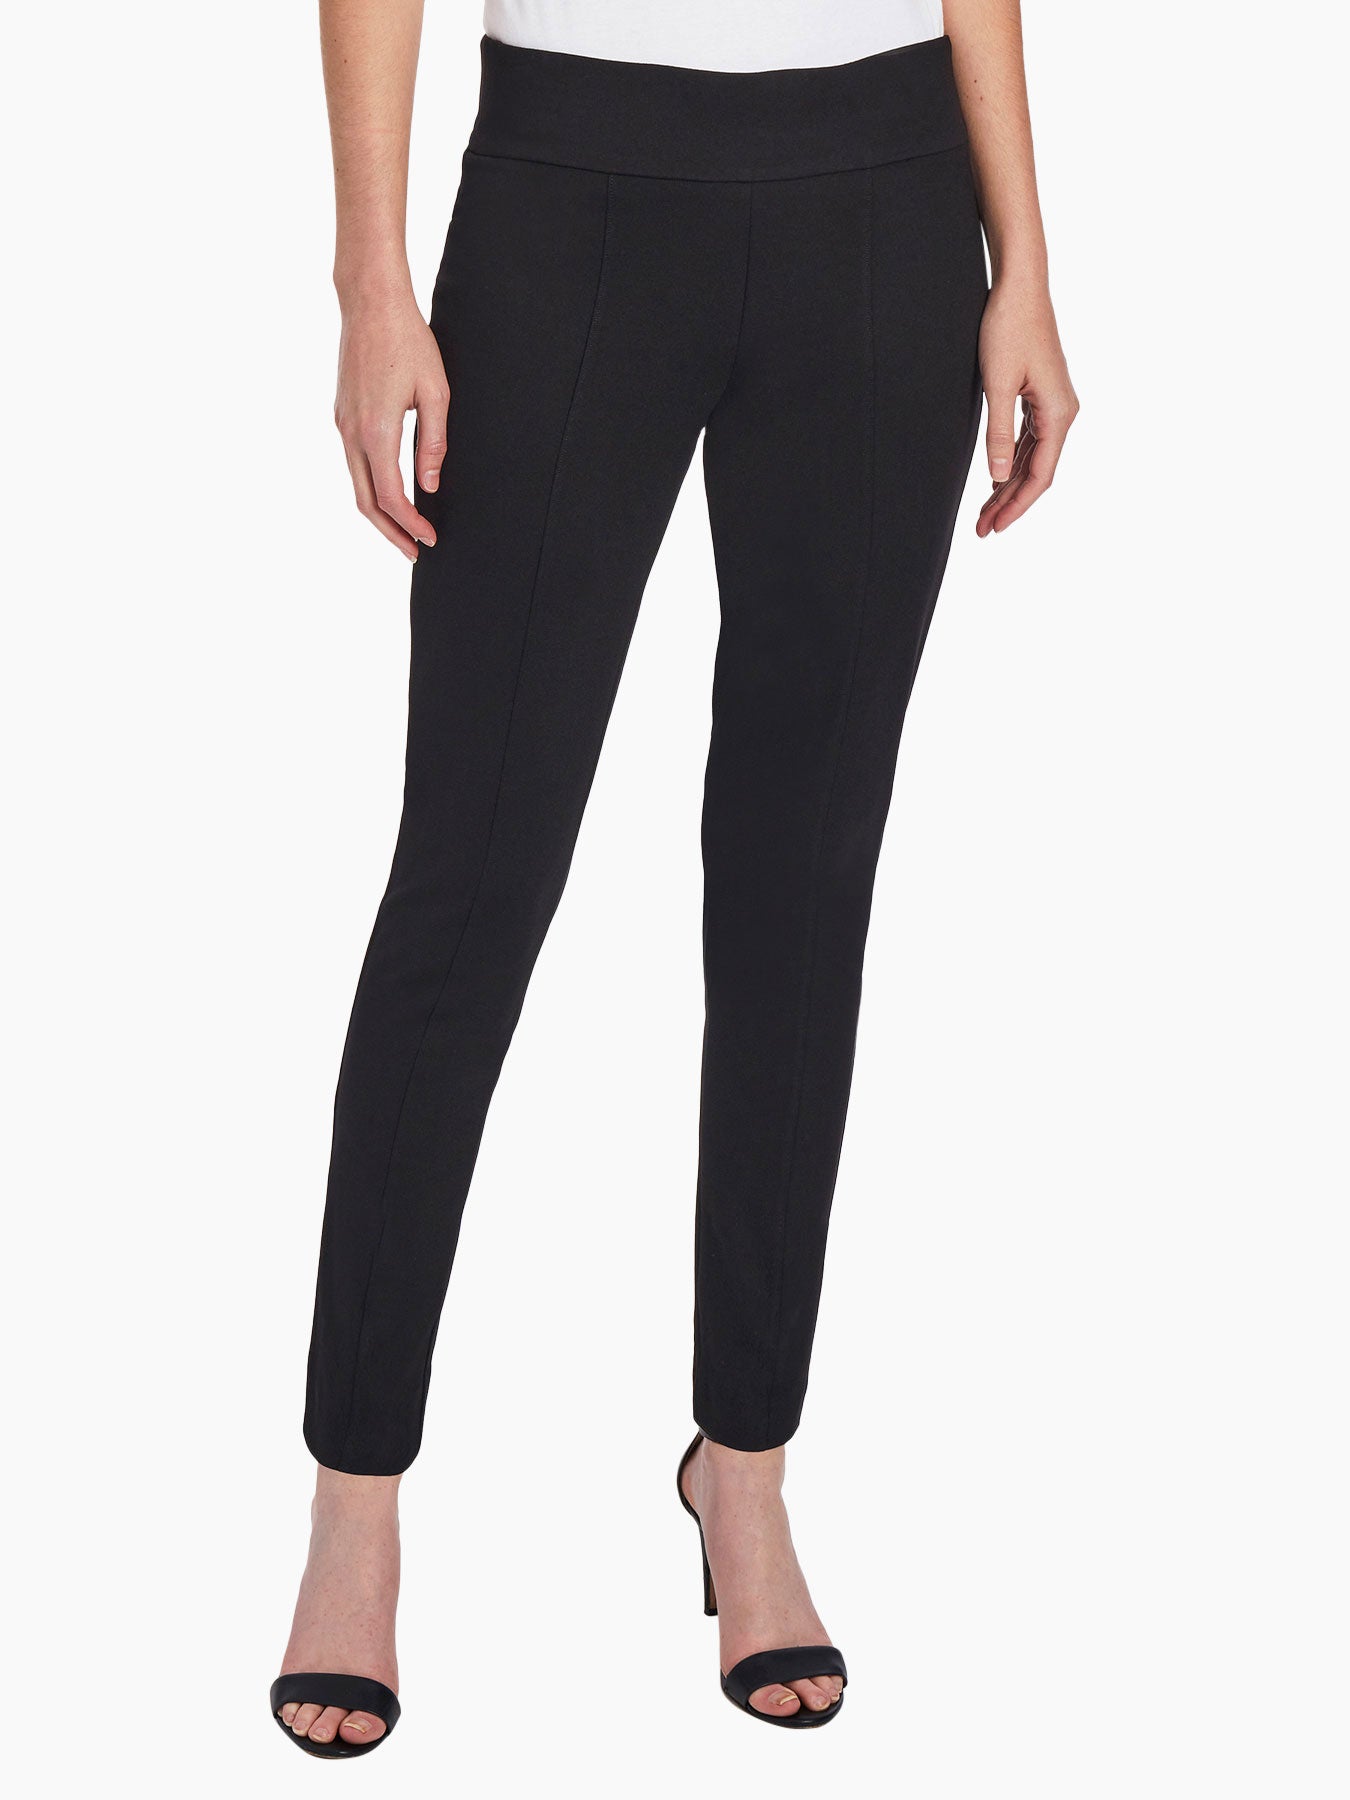 Ankle Length Pants - Get Offers on Ankle length pants upto 70% off